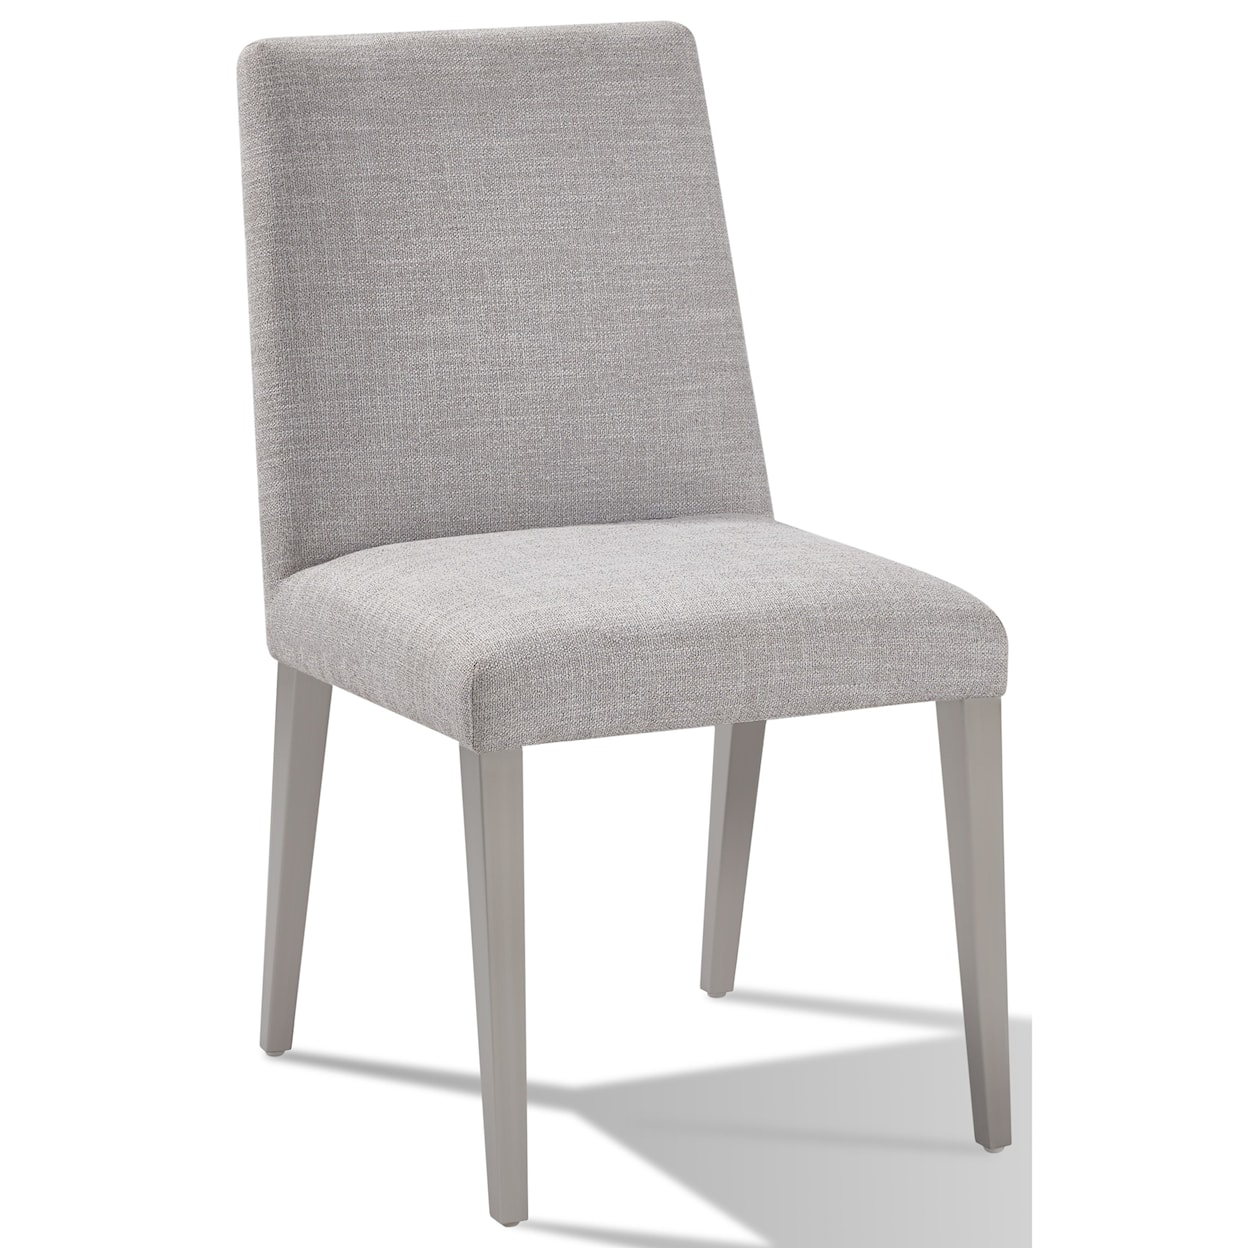 Modus International Omnia Chair - Silver/Brushed Stainless Steel